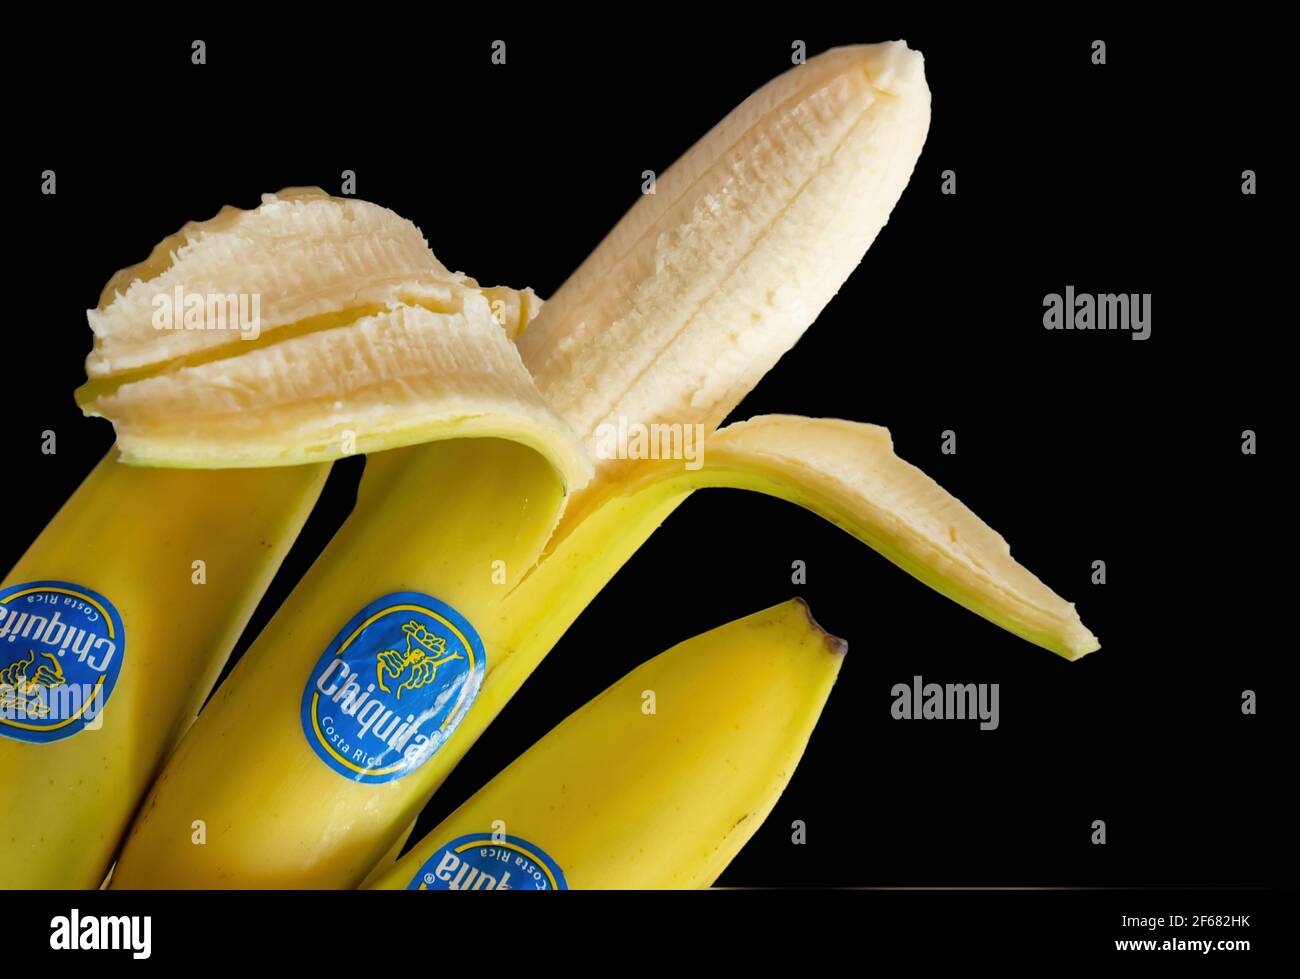 Ripe bananas with Label isolated on black background Stock Photo